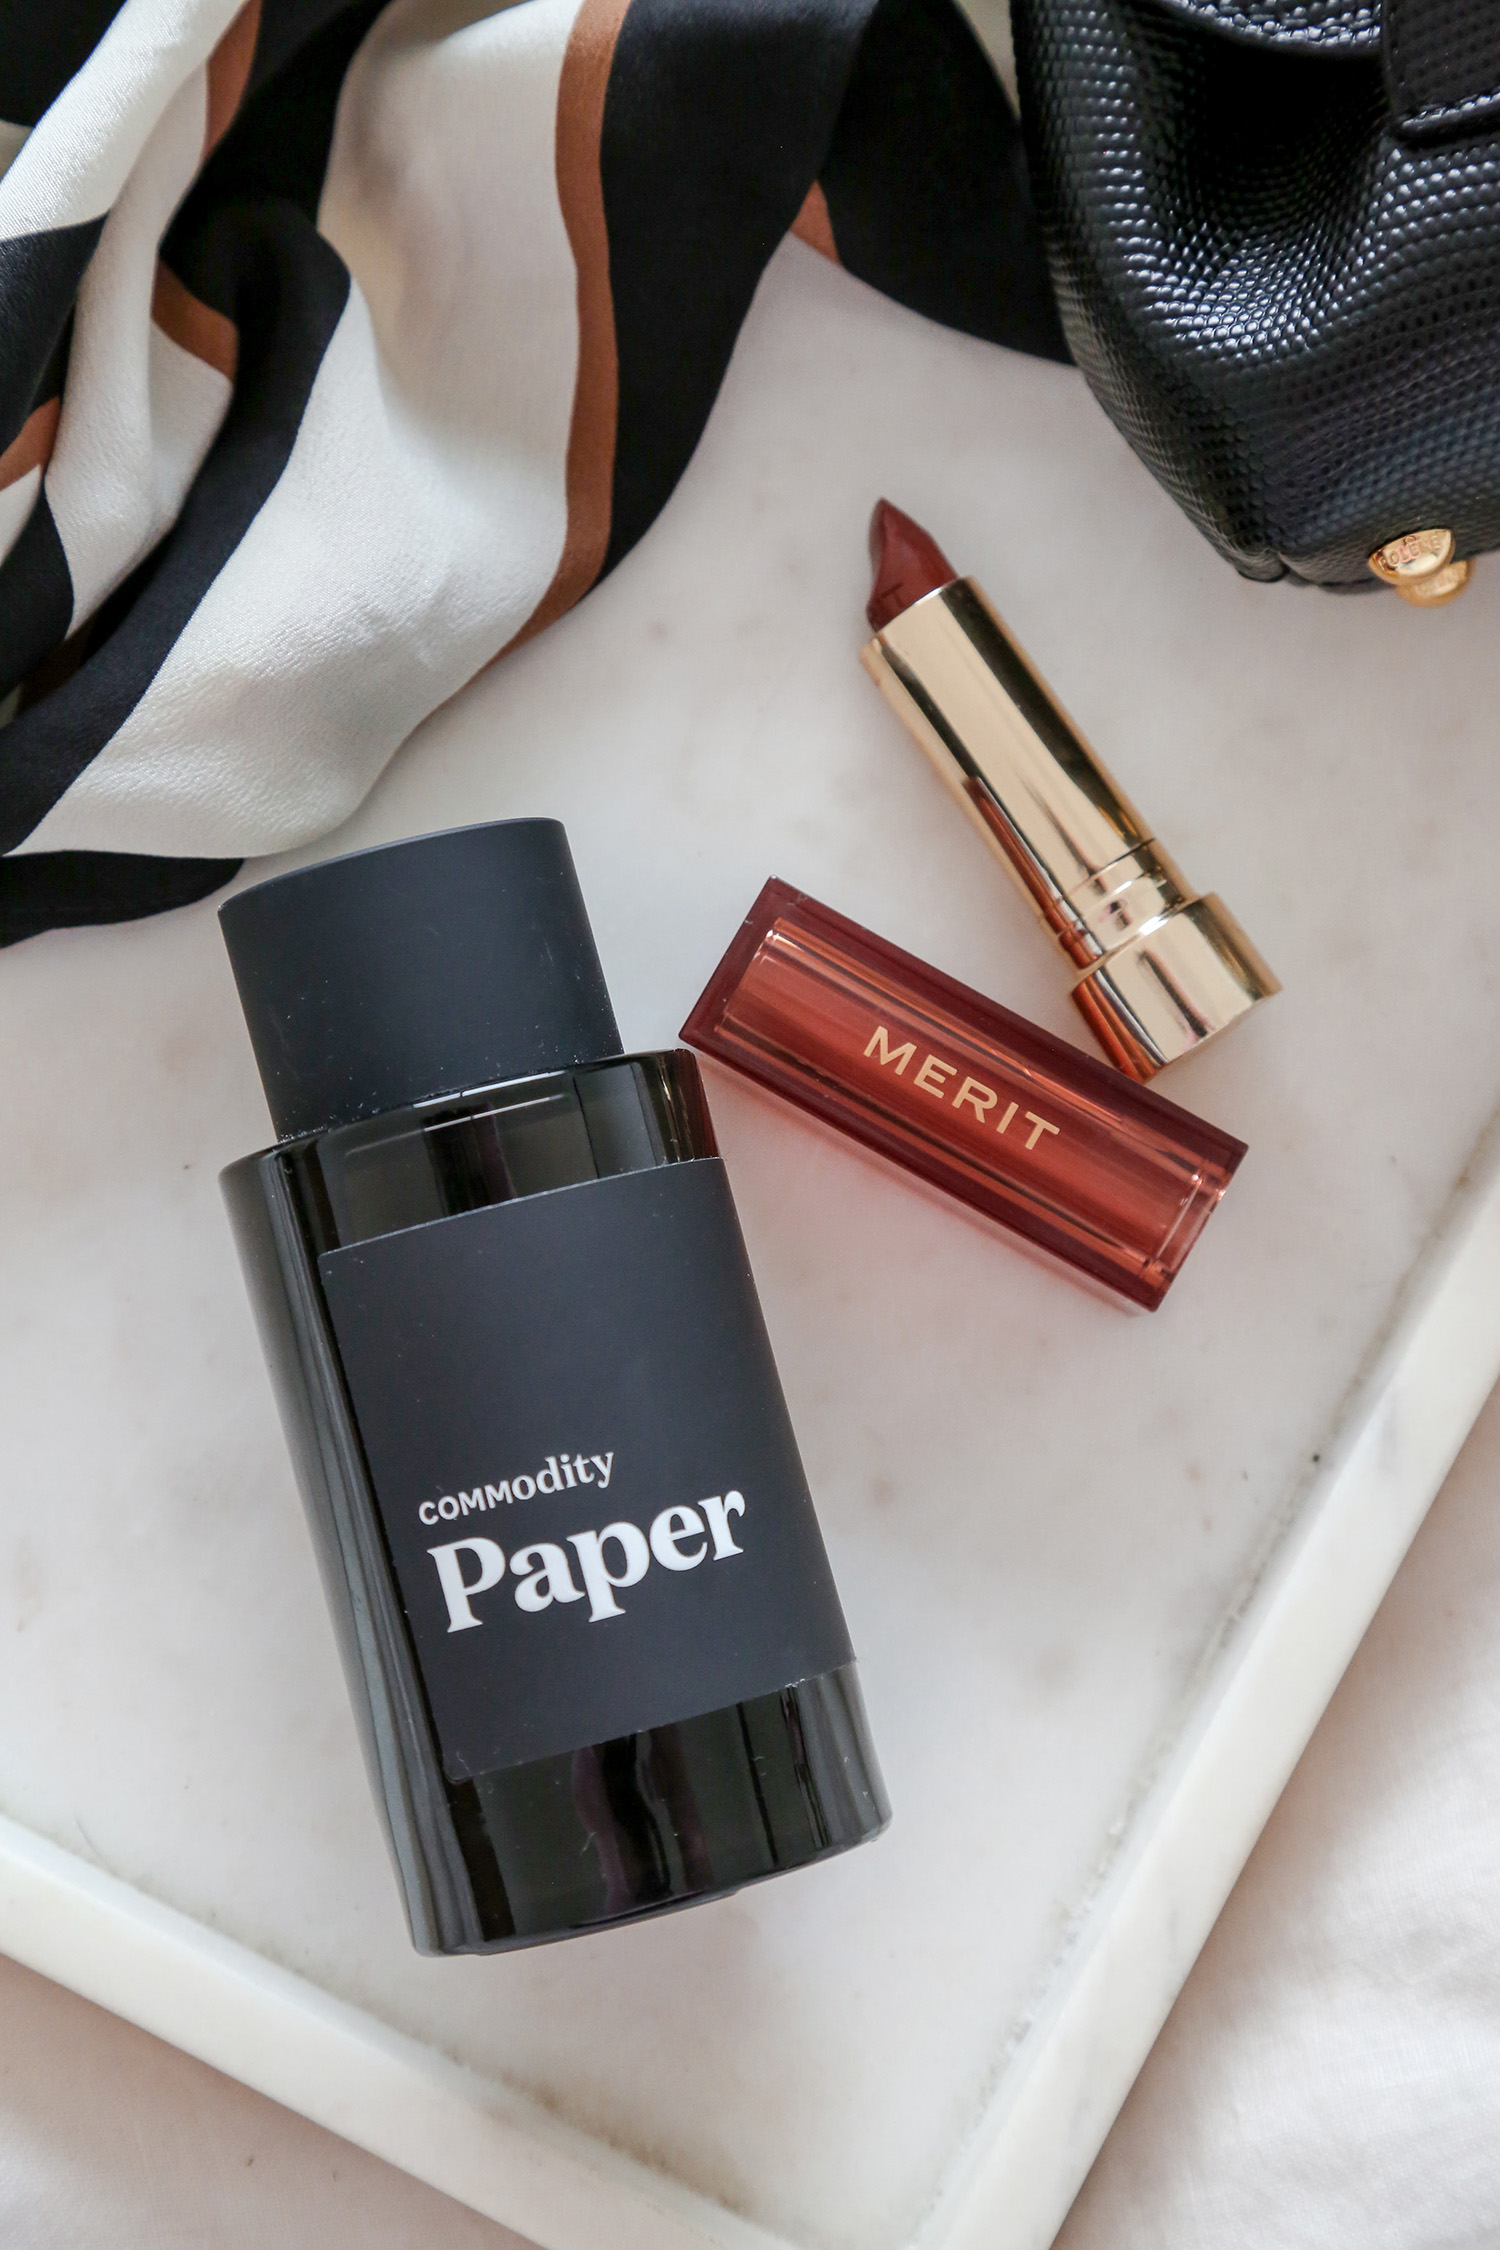 Commodity Paper fragrance and Merit Lipstick in Tiger